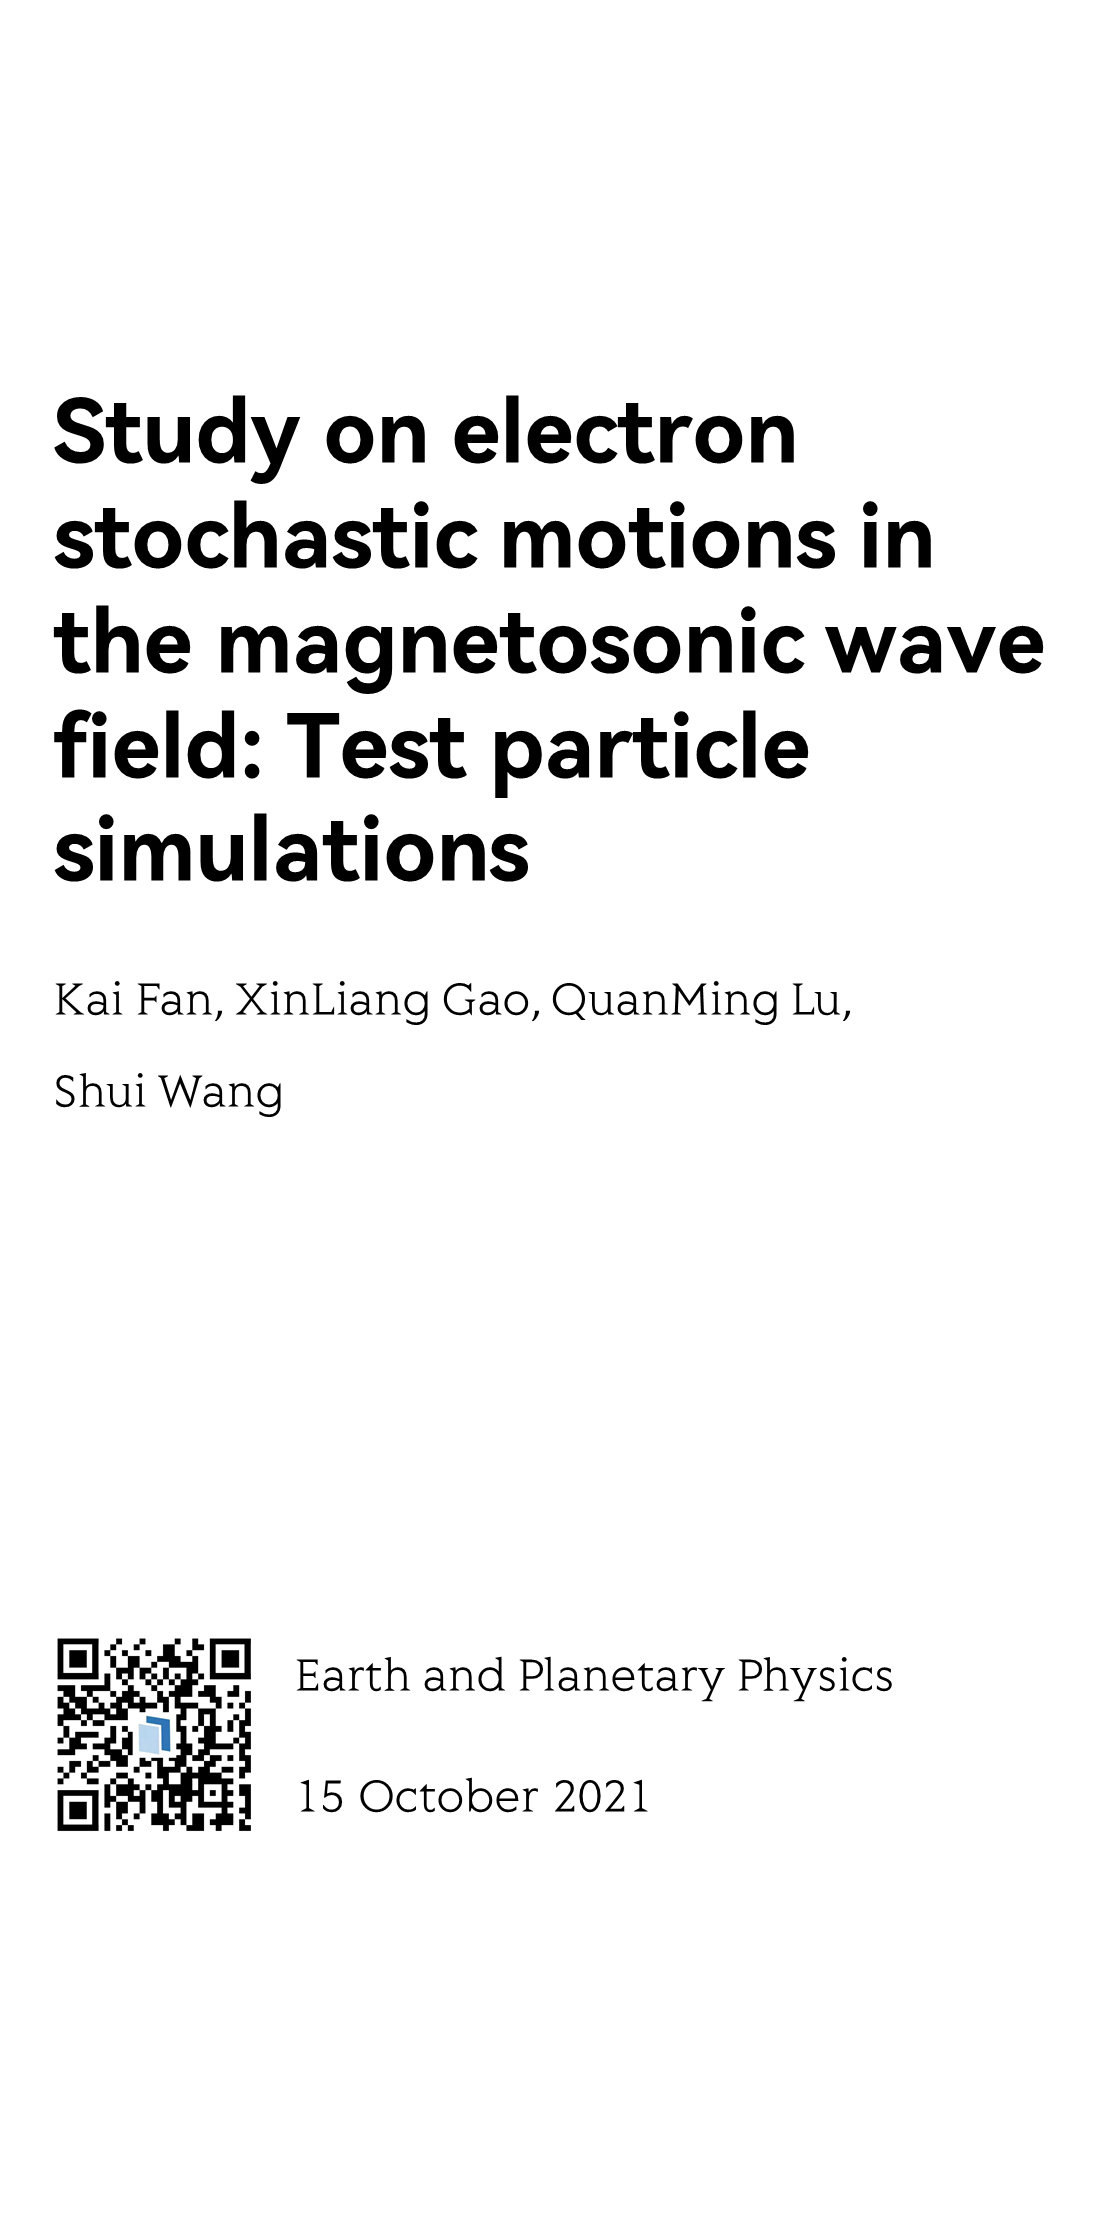 Study on electron stochastic motions in the magnetosonic wave field: Test particle simulations_1